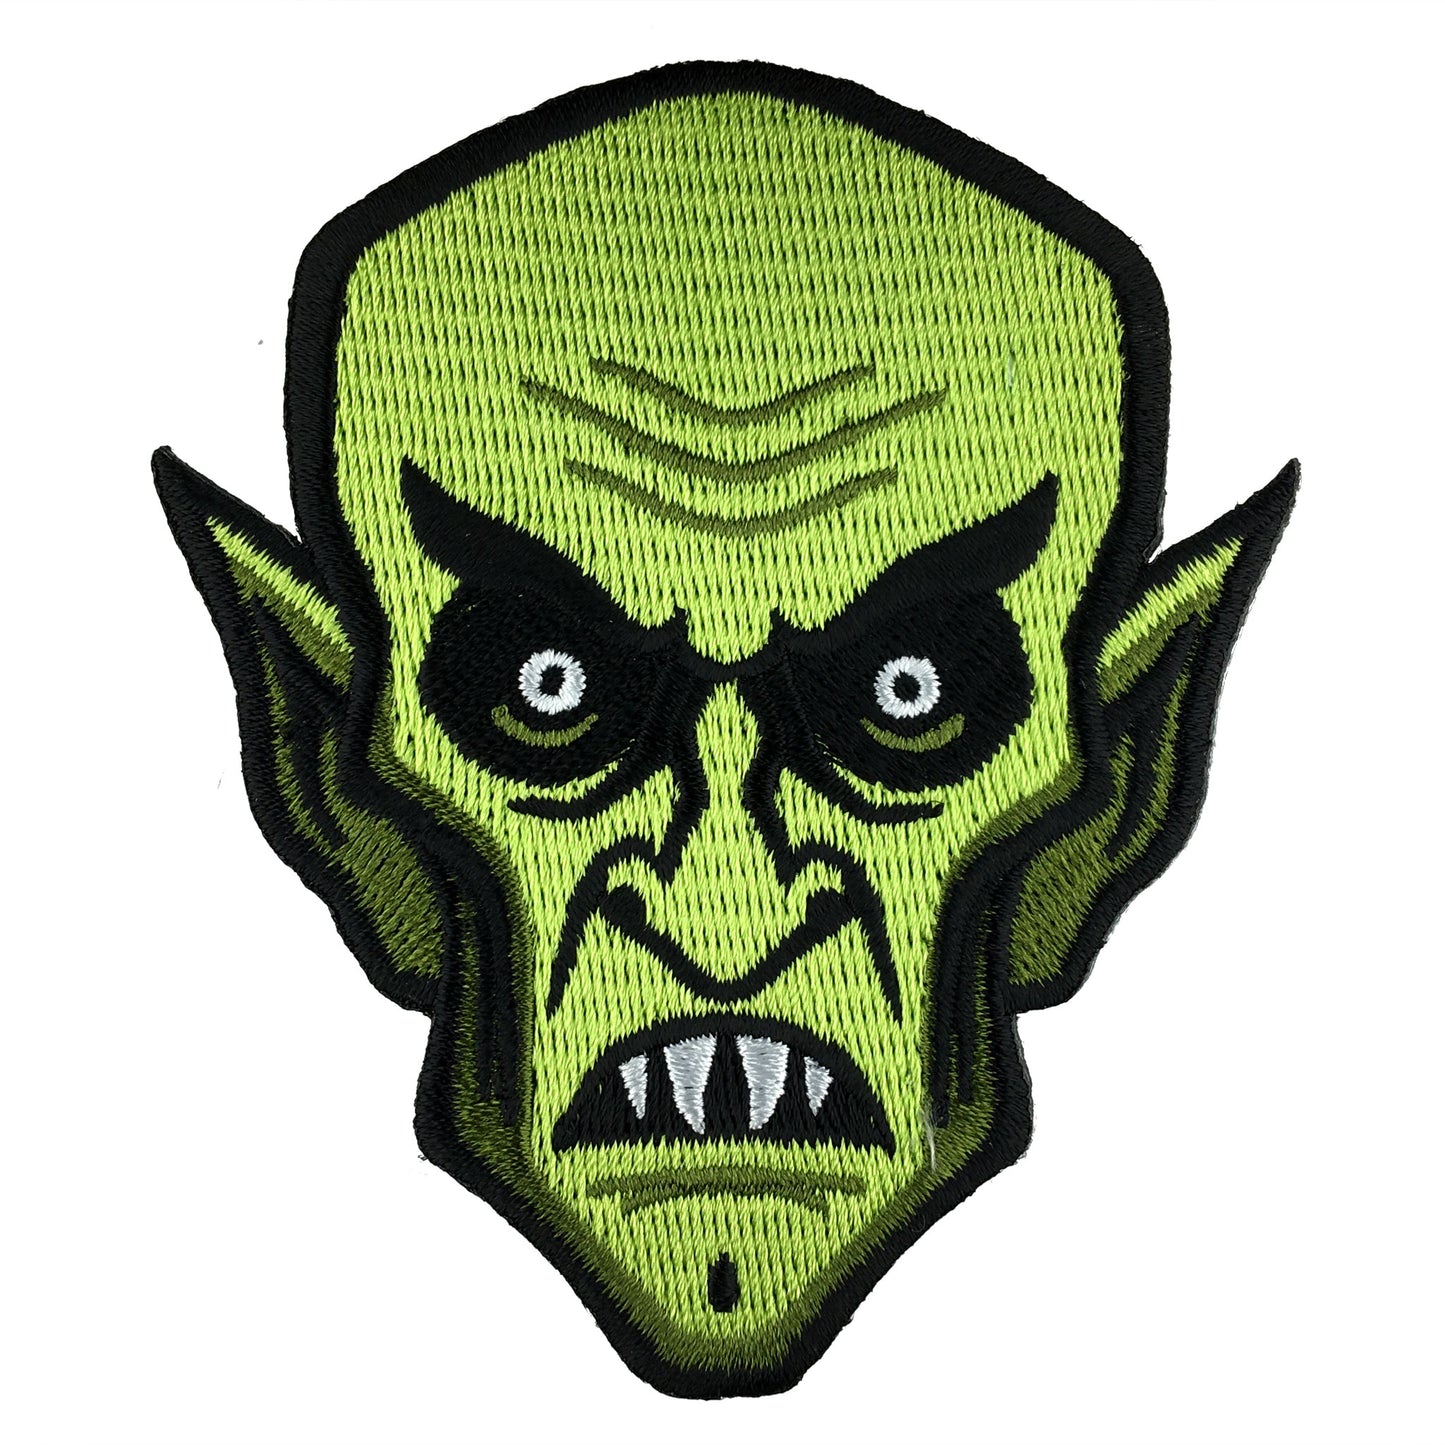 Nosferatu Orlok horror monster head embroidered patch by Monsterologist